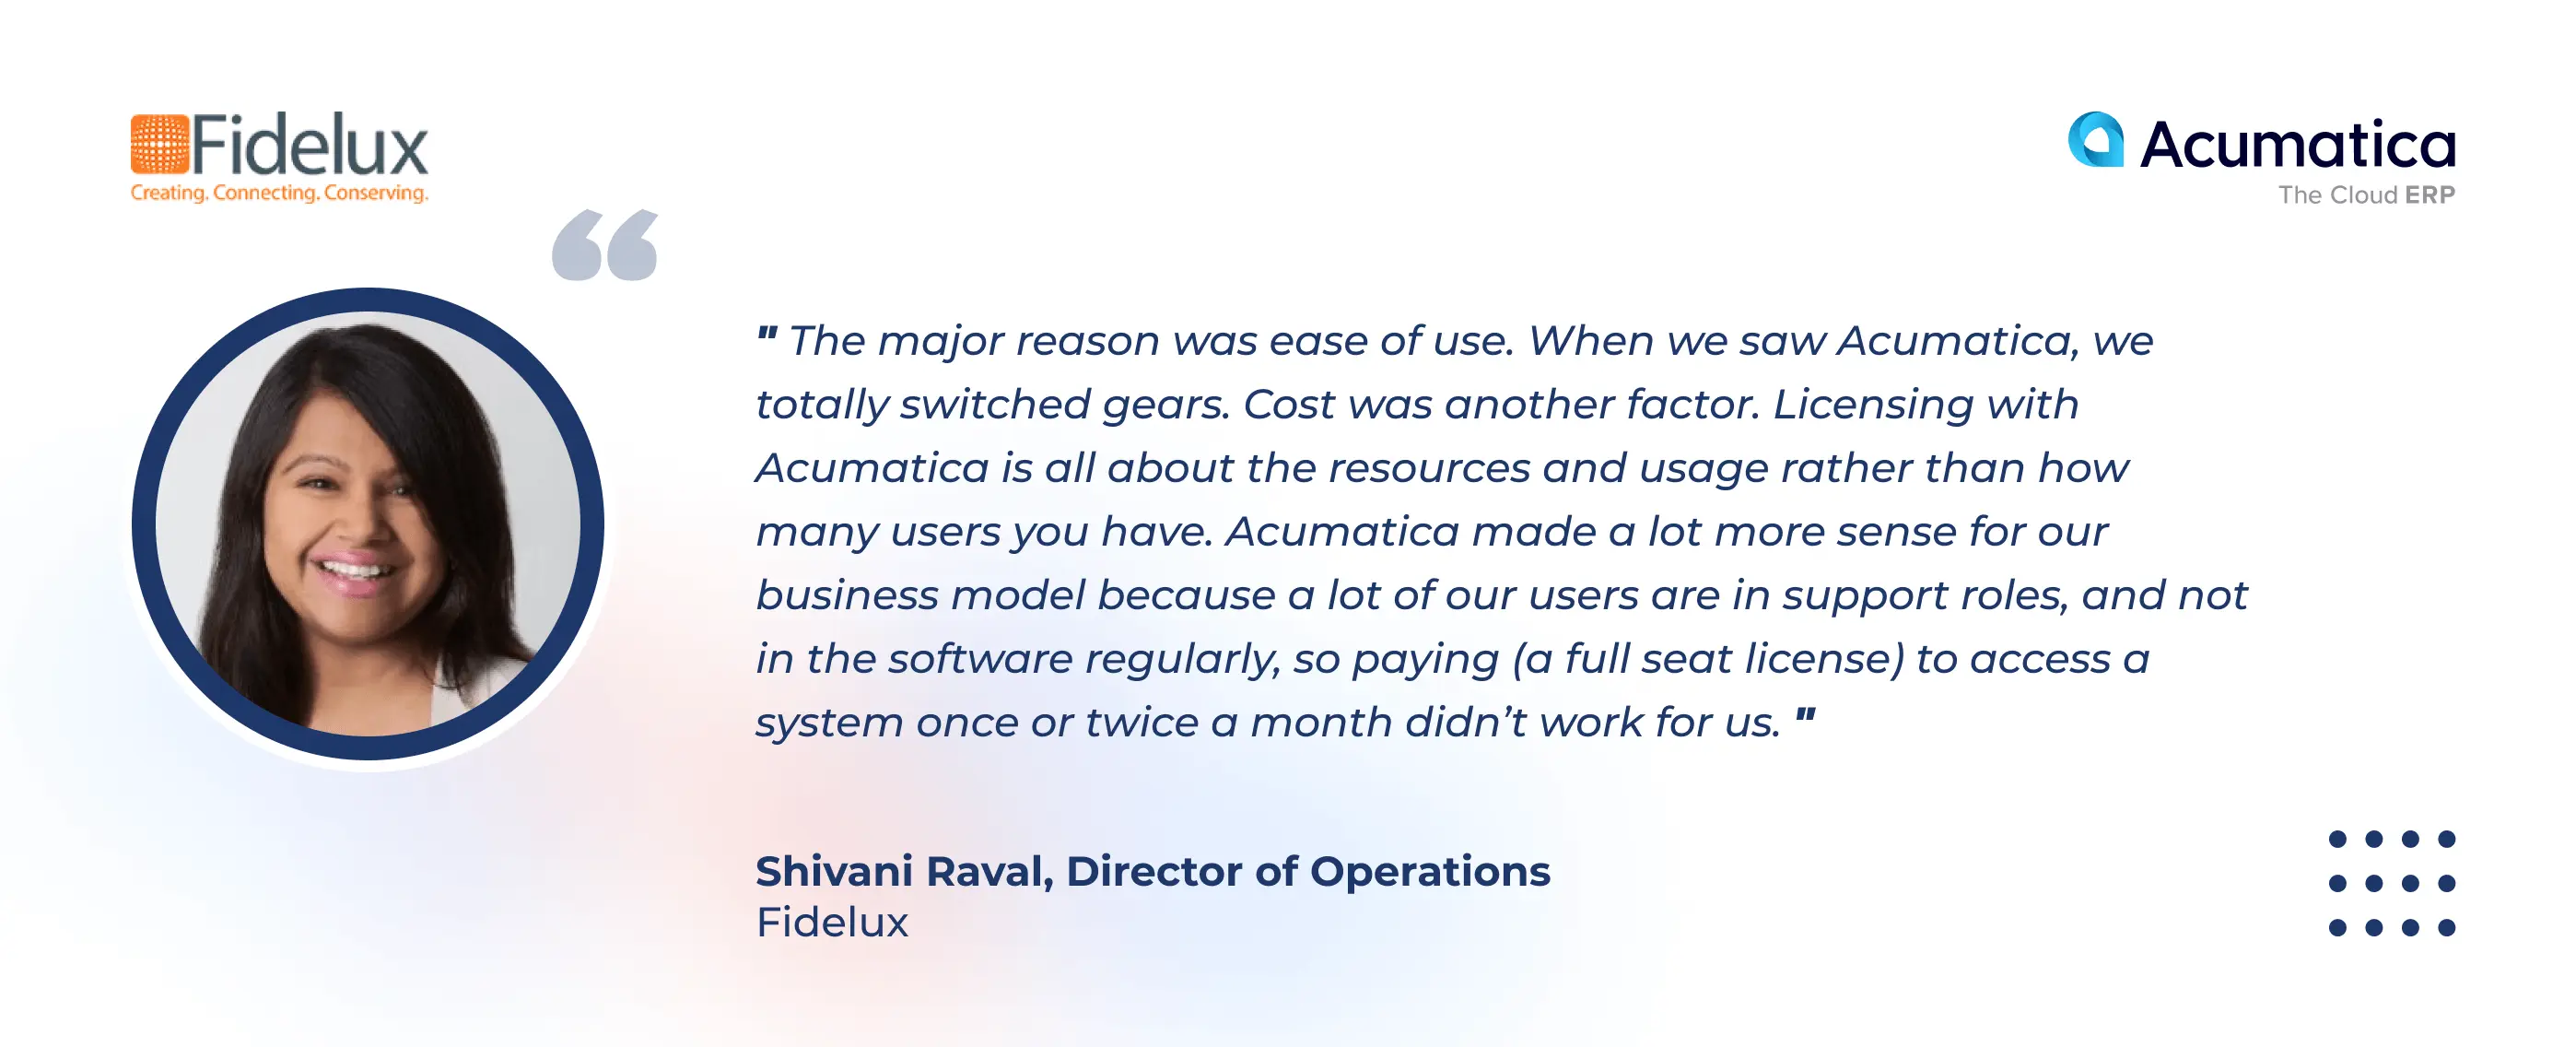 A quote of Shivani Raval, Director of Operations at Fidelux, about the reason of choosing Acumatica Cloud ERP